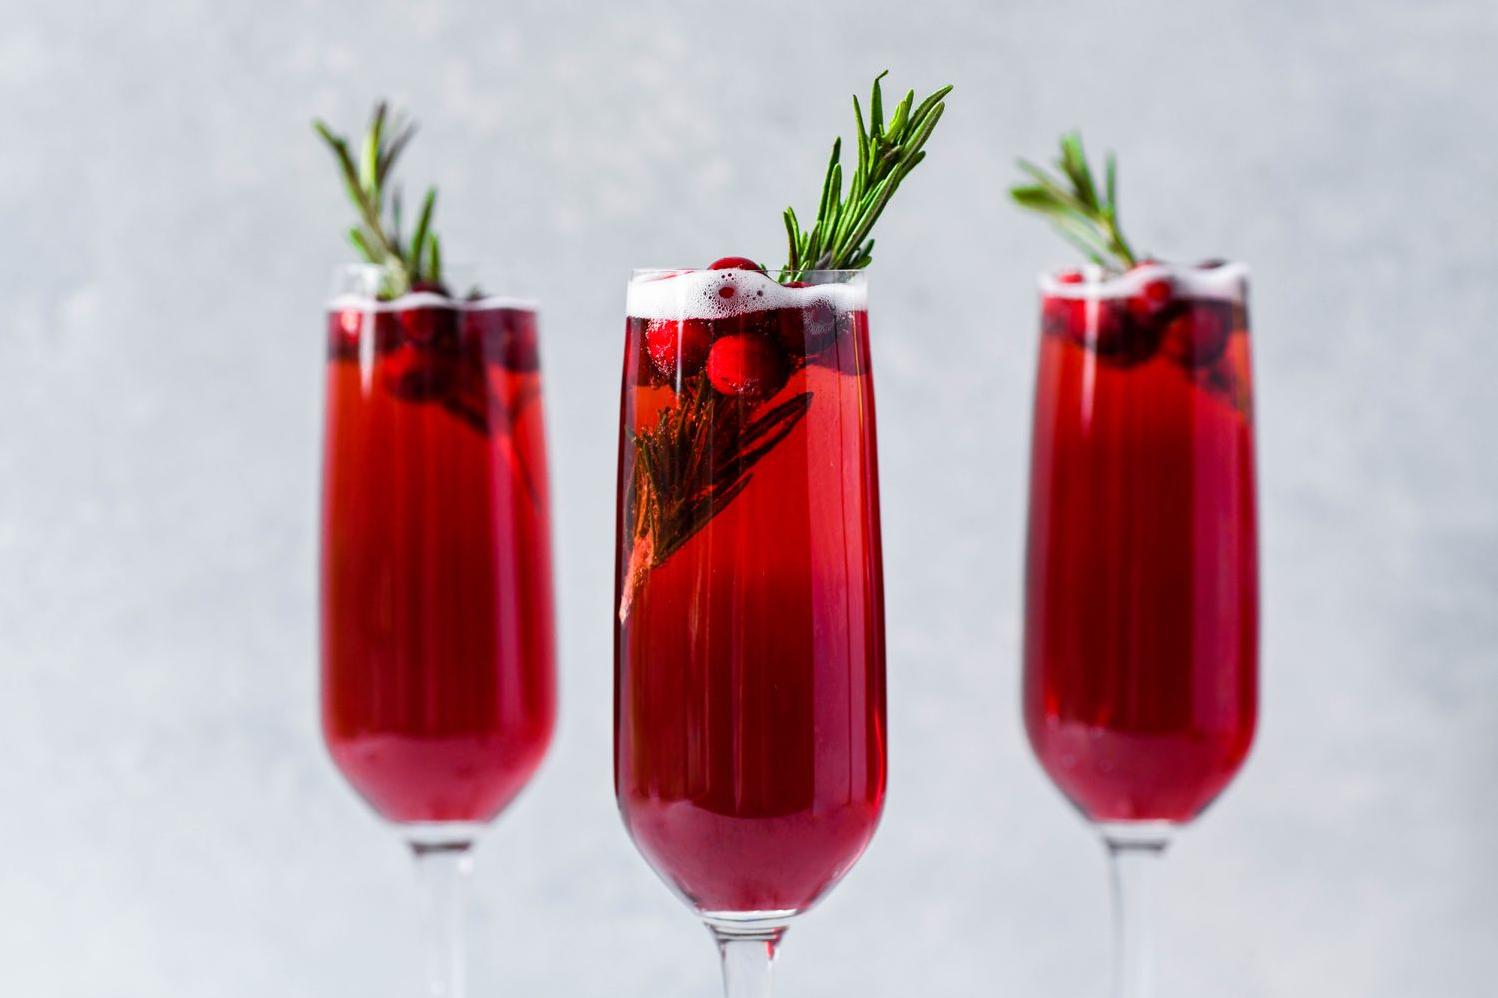  A sweet and tangy variation on the classic French Kir